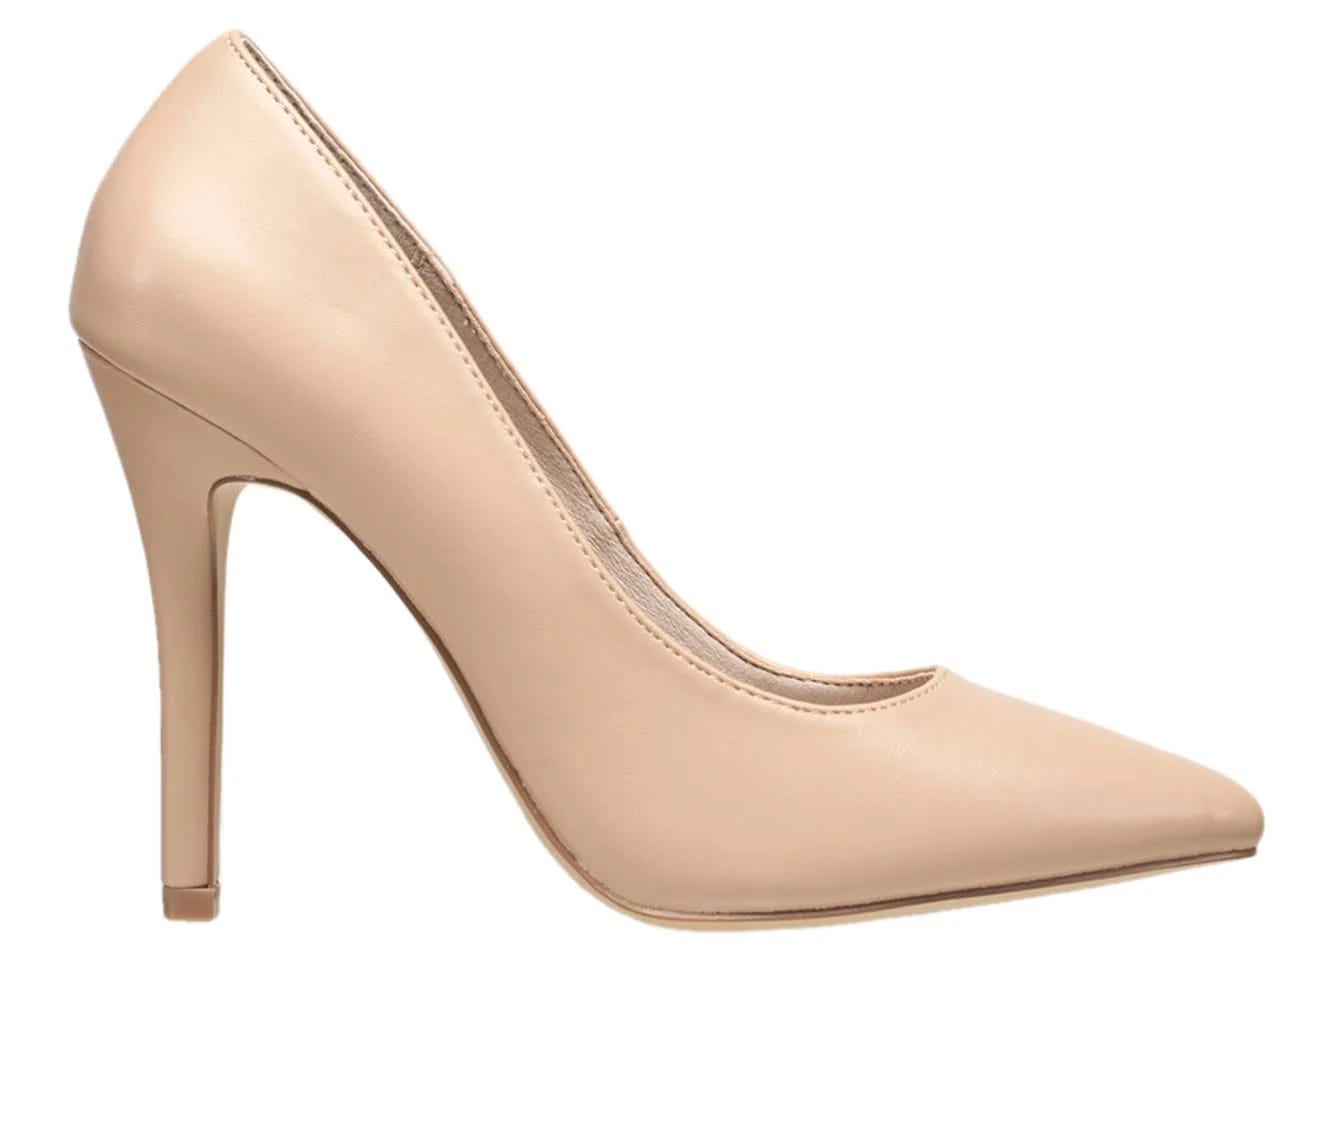 French Connection Nude Pump Heels in Size 8.5M | Image